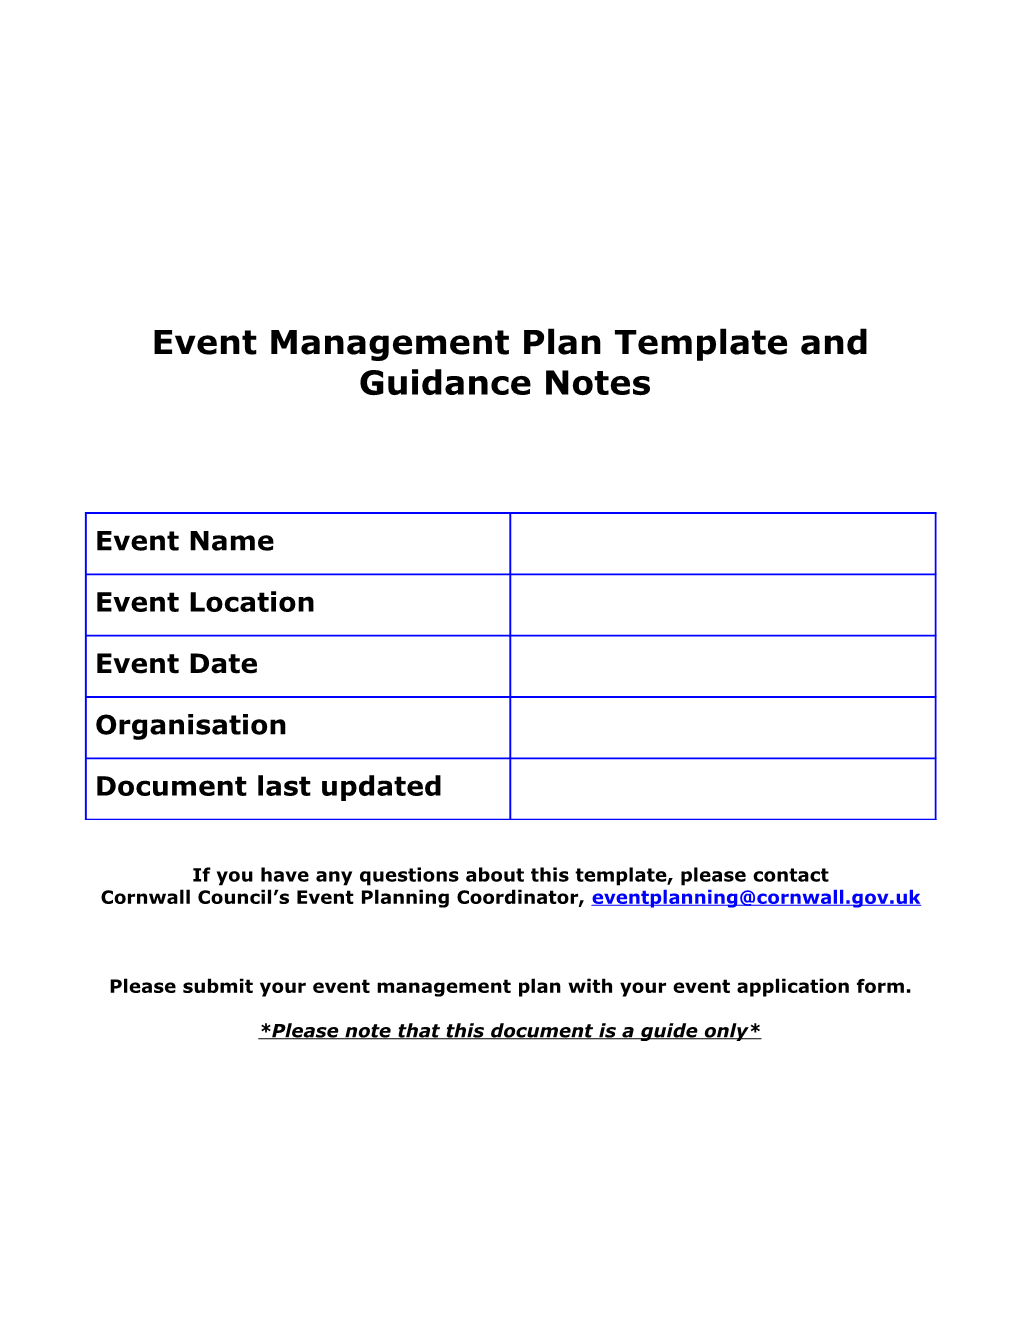 Event Management Plan Template and Guidance Notes